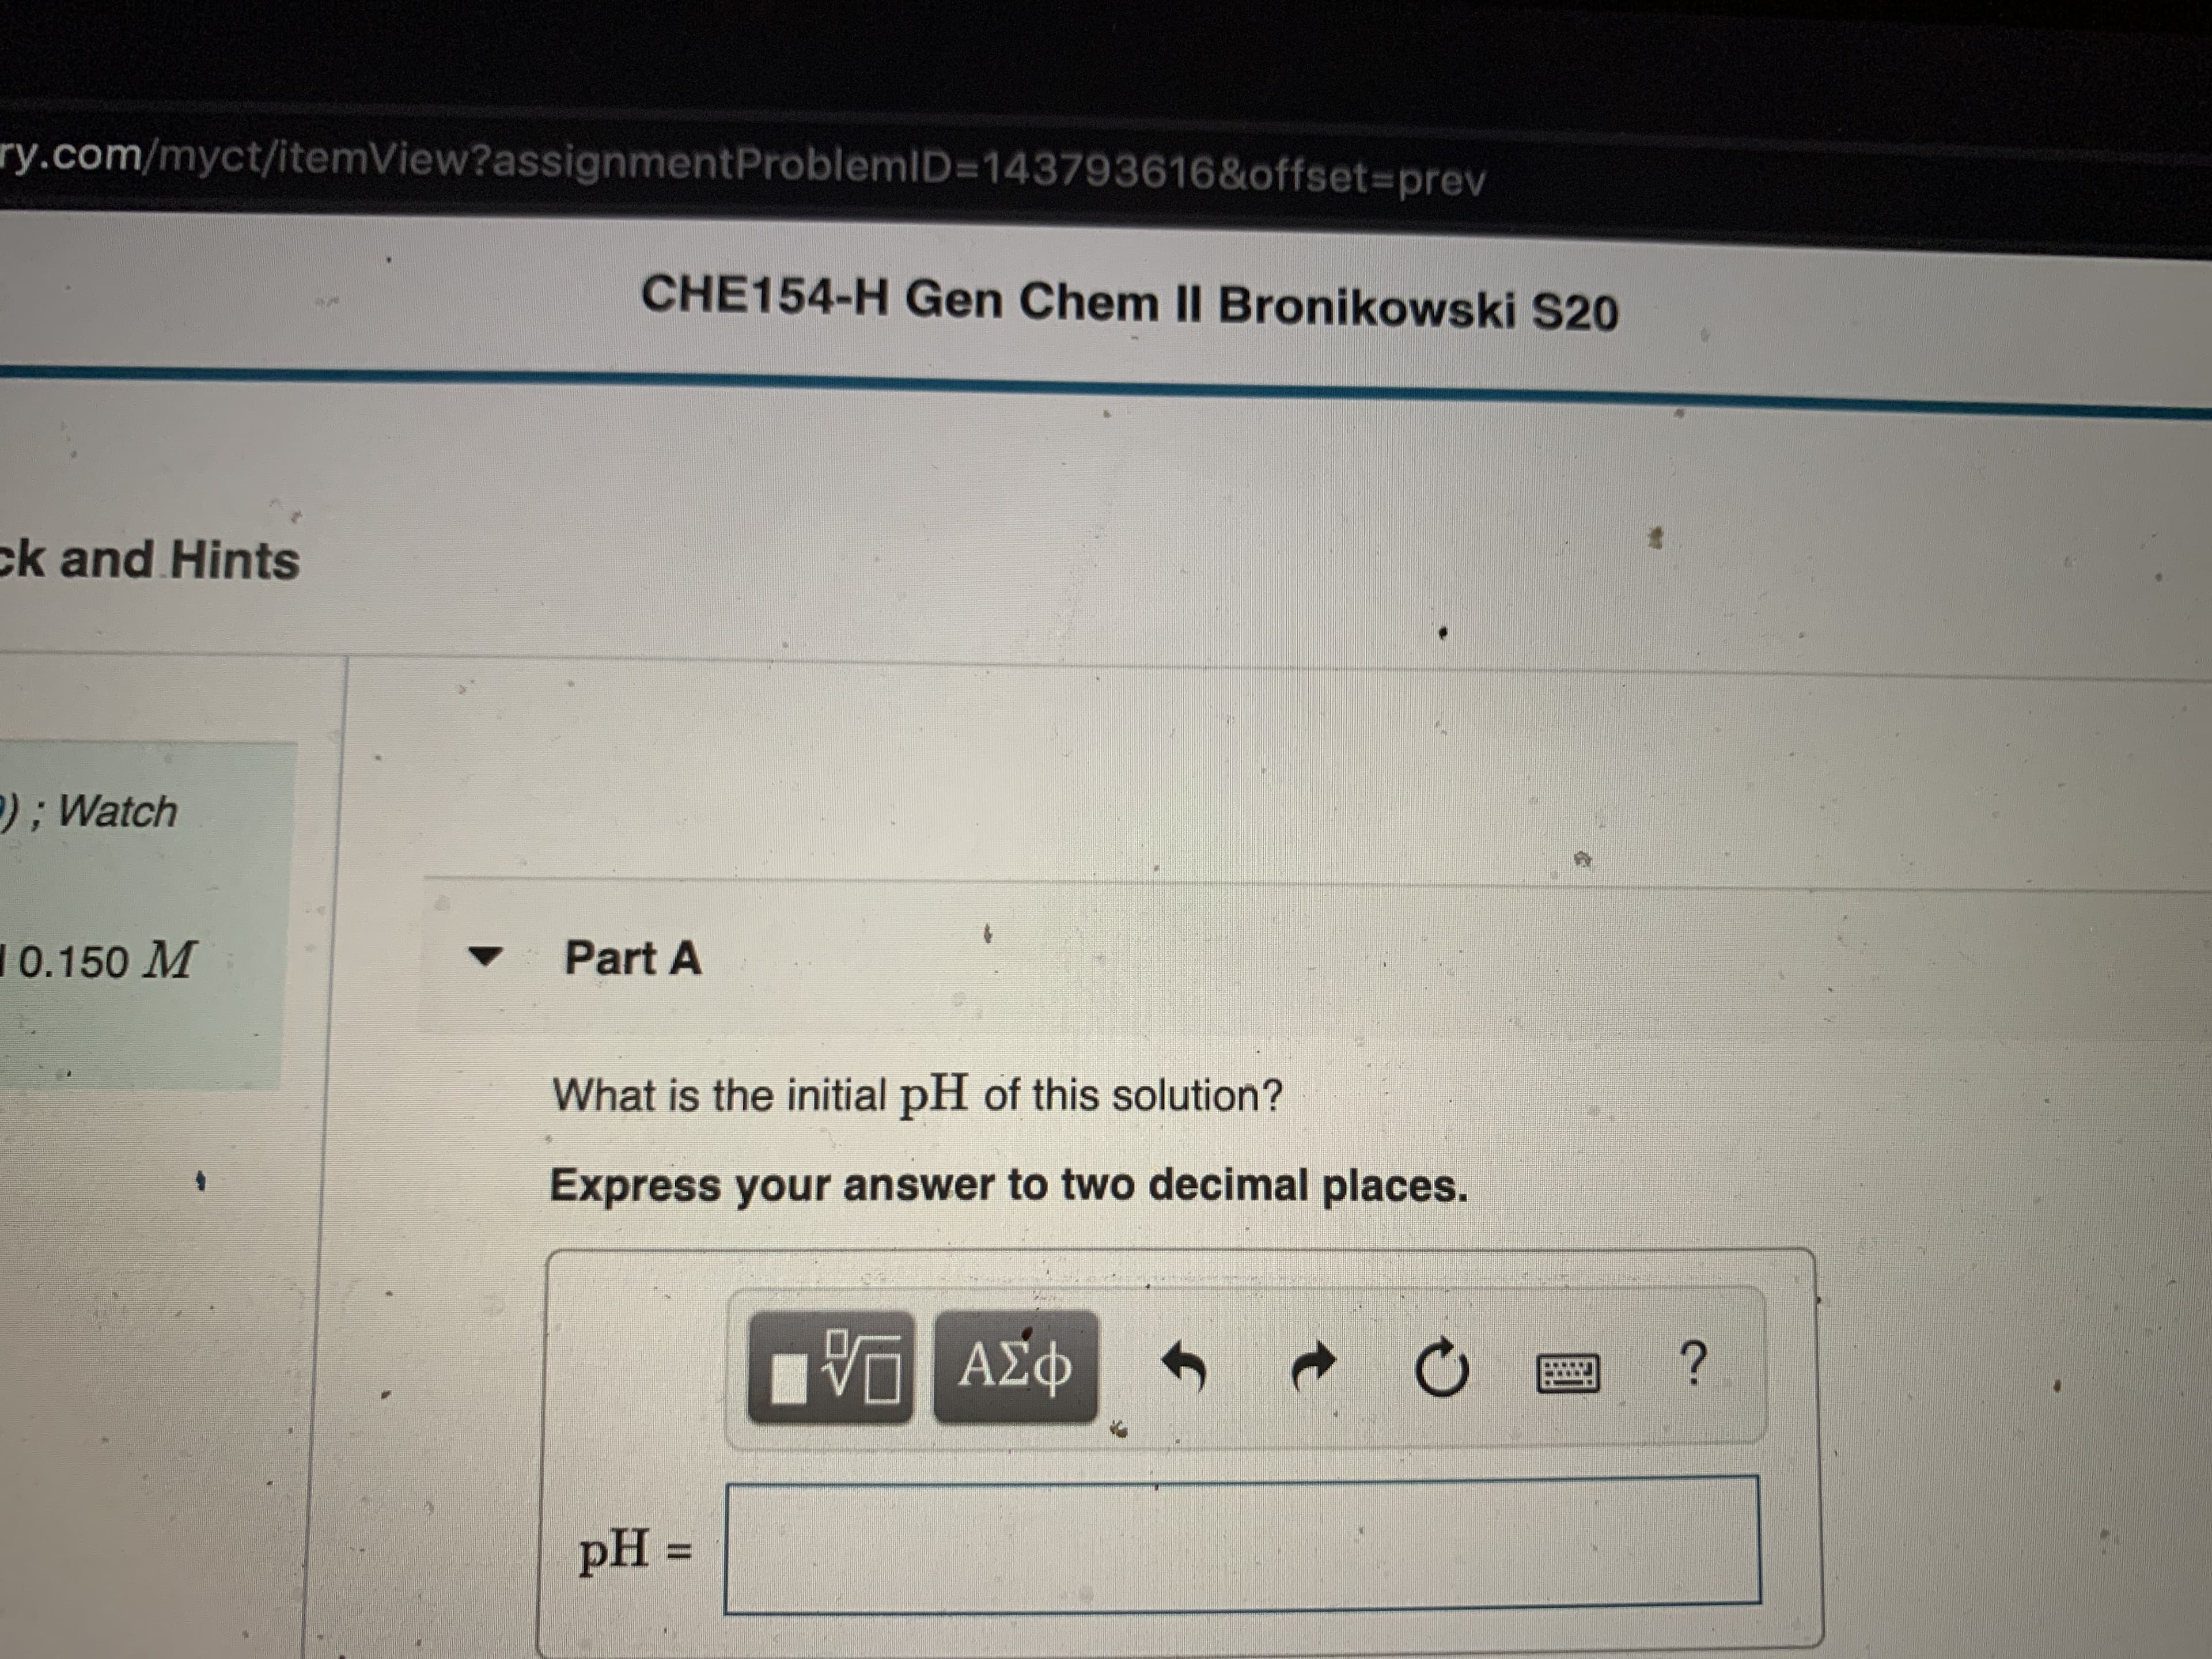 ry.com/myct/itemView?assignmentProblemID=D143793616&offset%3Dprev
CHE154-H Gen Chem II Bronikowski S20
ck and Hints
);Watch
10.150 M
Part A
What is the initial pH of this solution?
Express your answer to two decimal places.
ΑΣΦ
pH =
%3D
